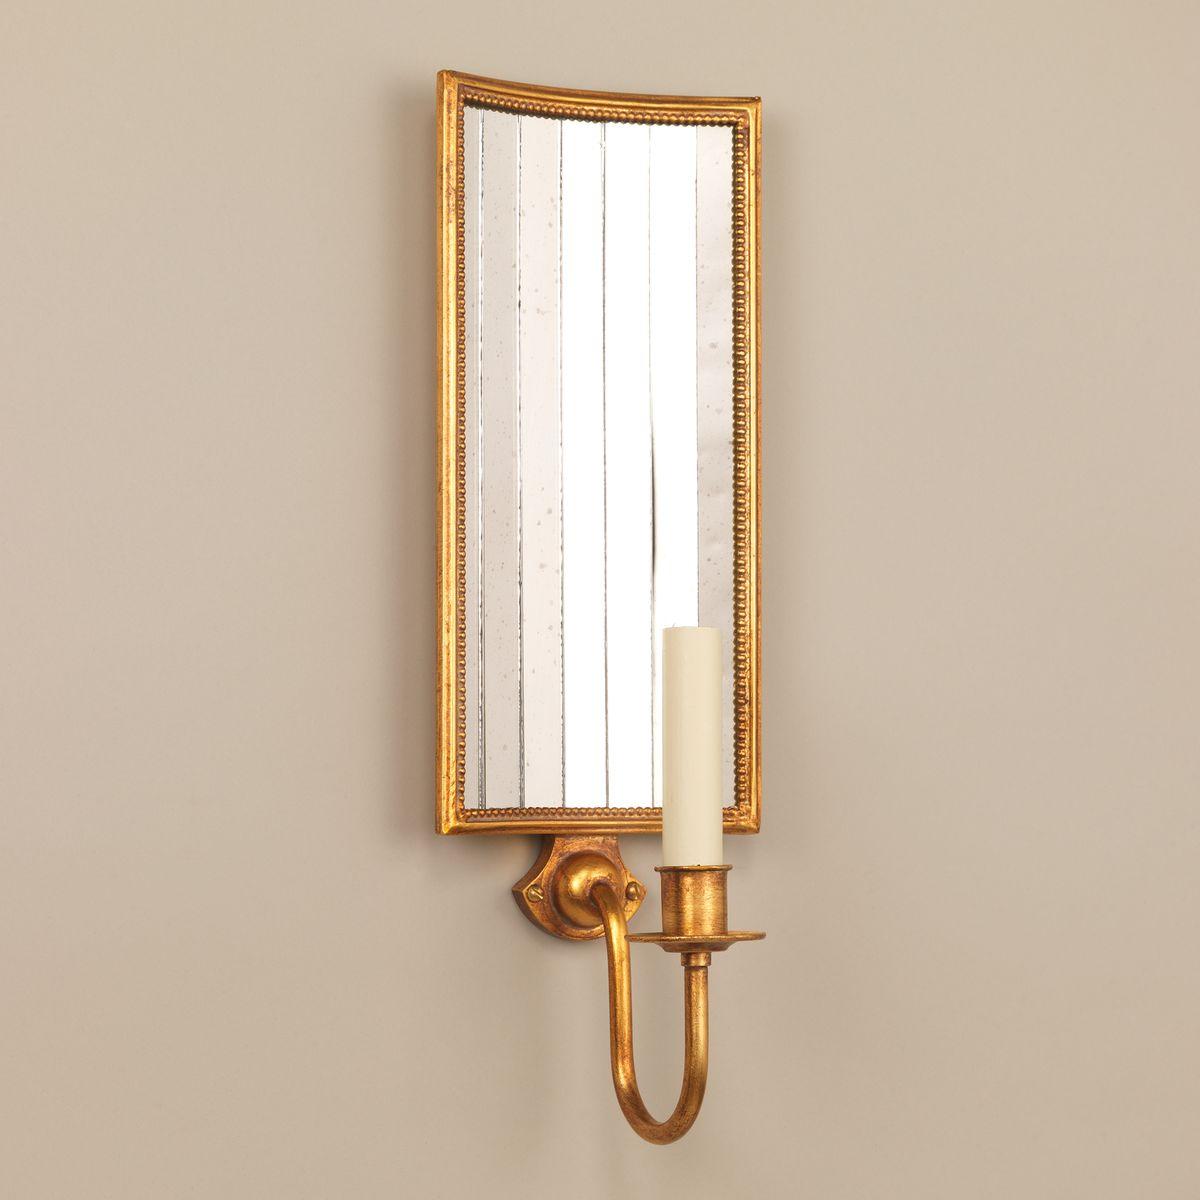 Painted Wonderful Pair Large Vaughan Tole Gold Gilt Mirror Strip Panel Wall Sconces  